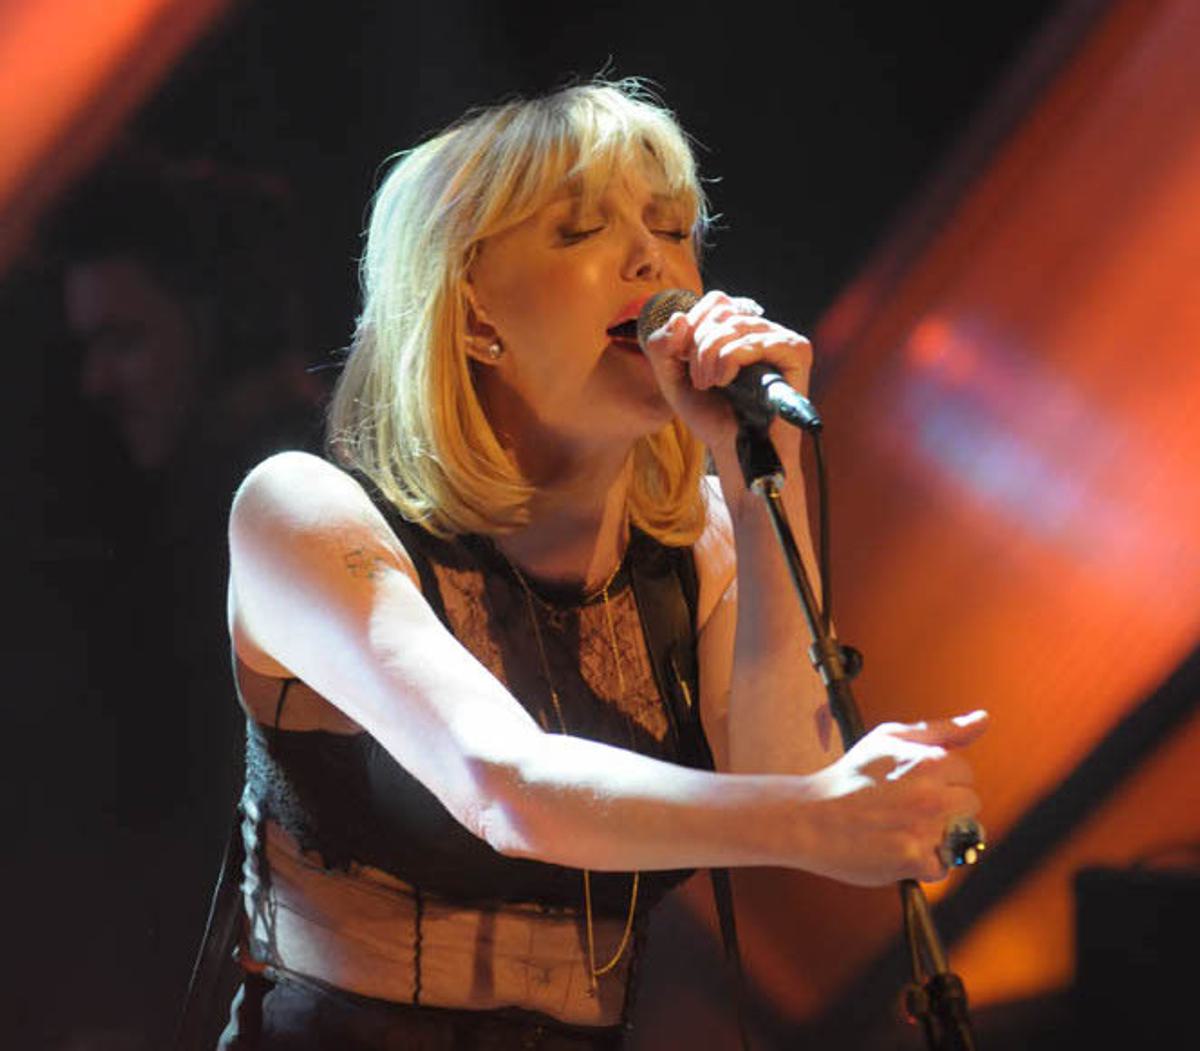 Courtney Love performing on Later with Jools Holland in 2010 credit Andre Csillag